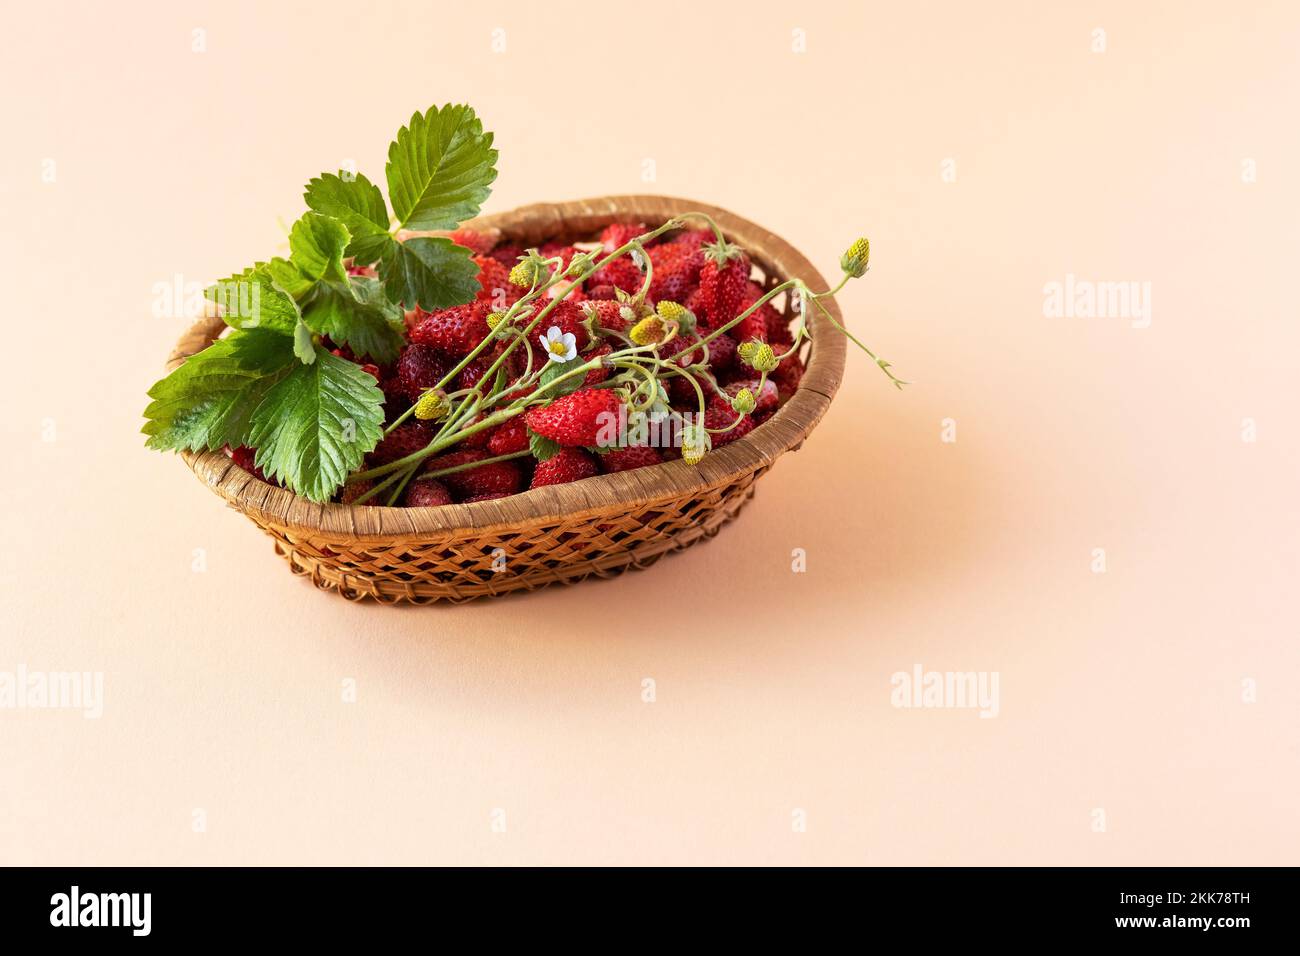 Wild strawberries in a beige basket on a orange background with green leaves, healthy and delicious food Stock Photo